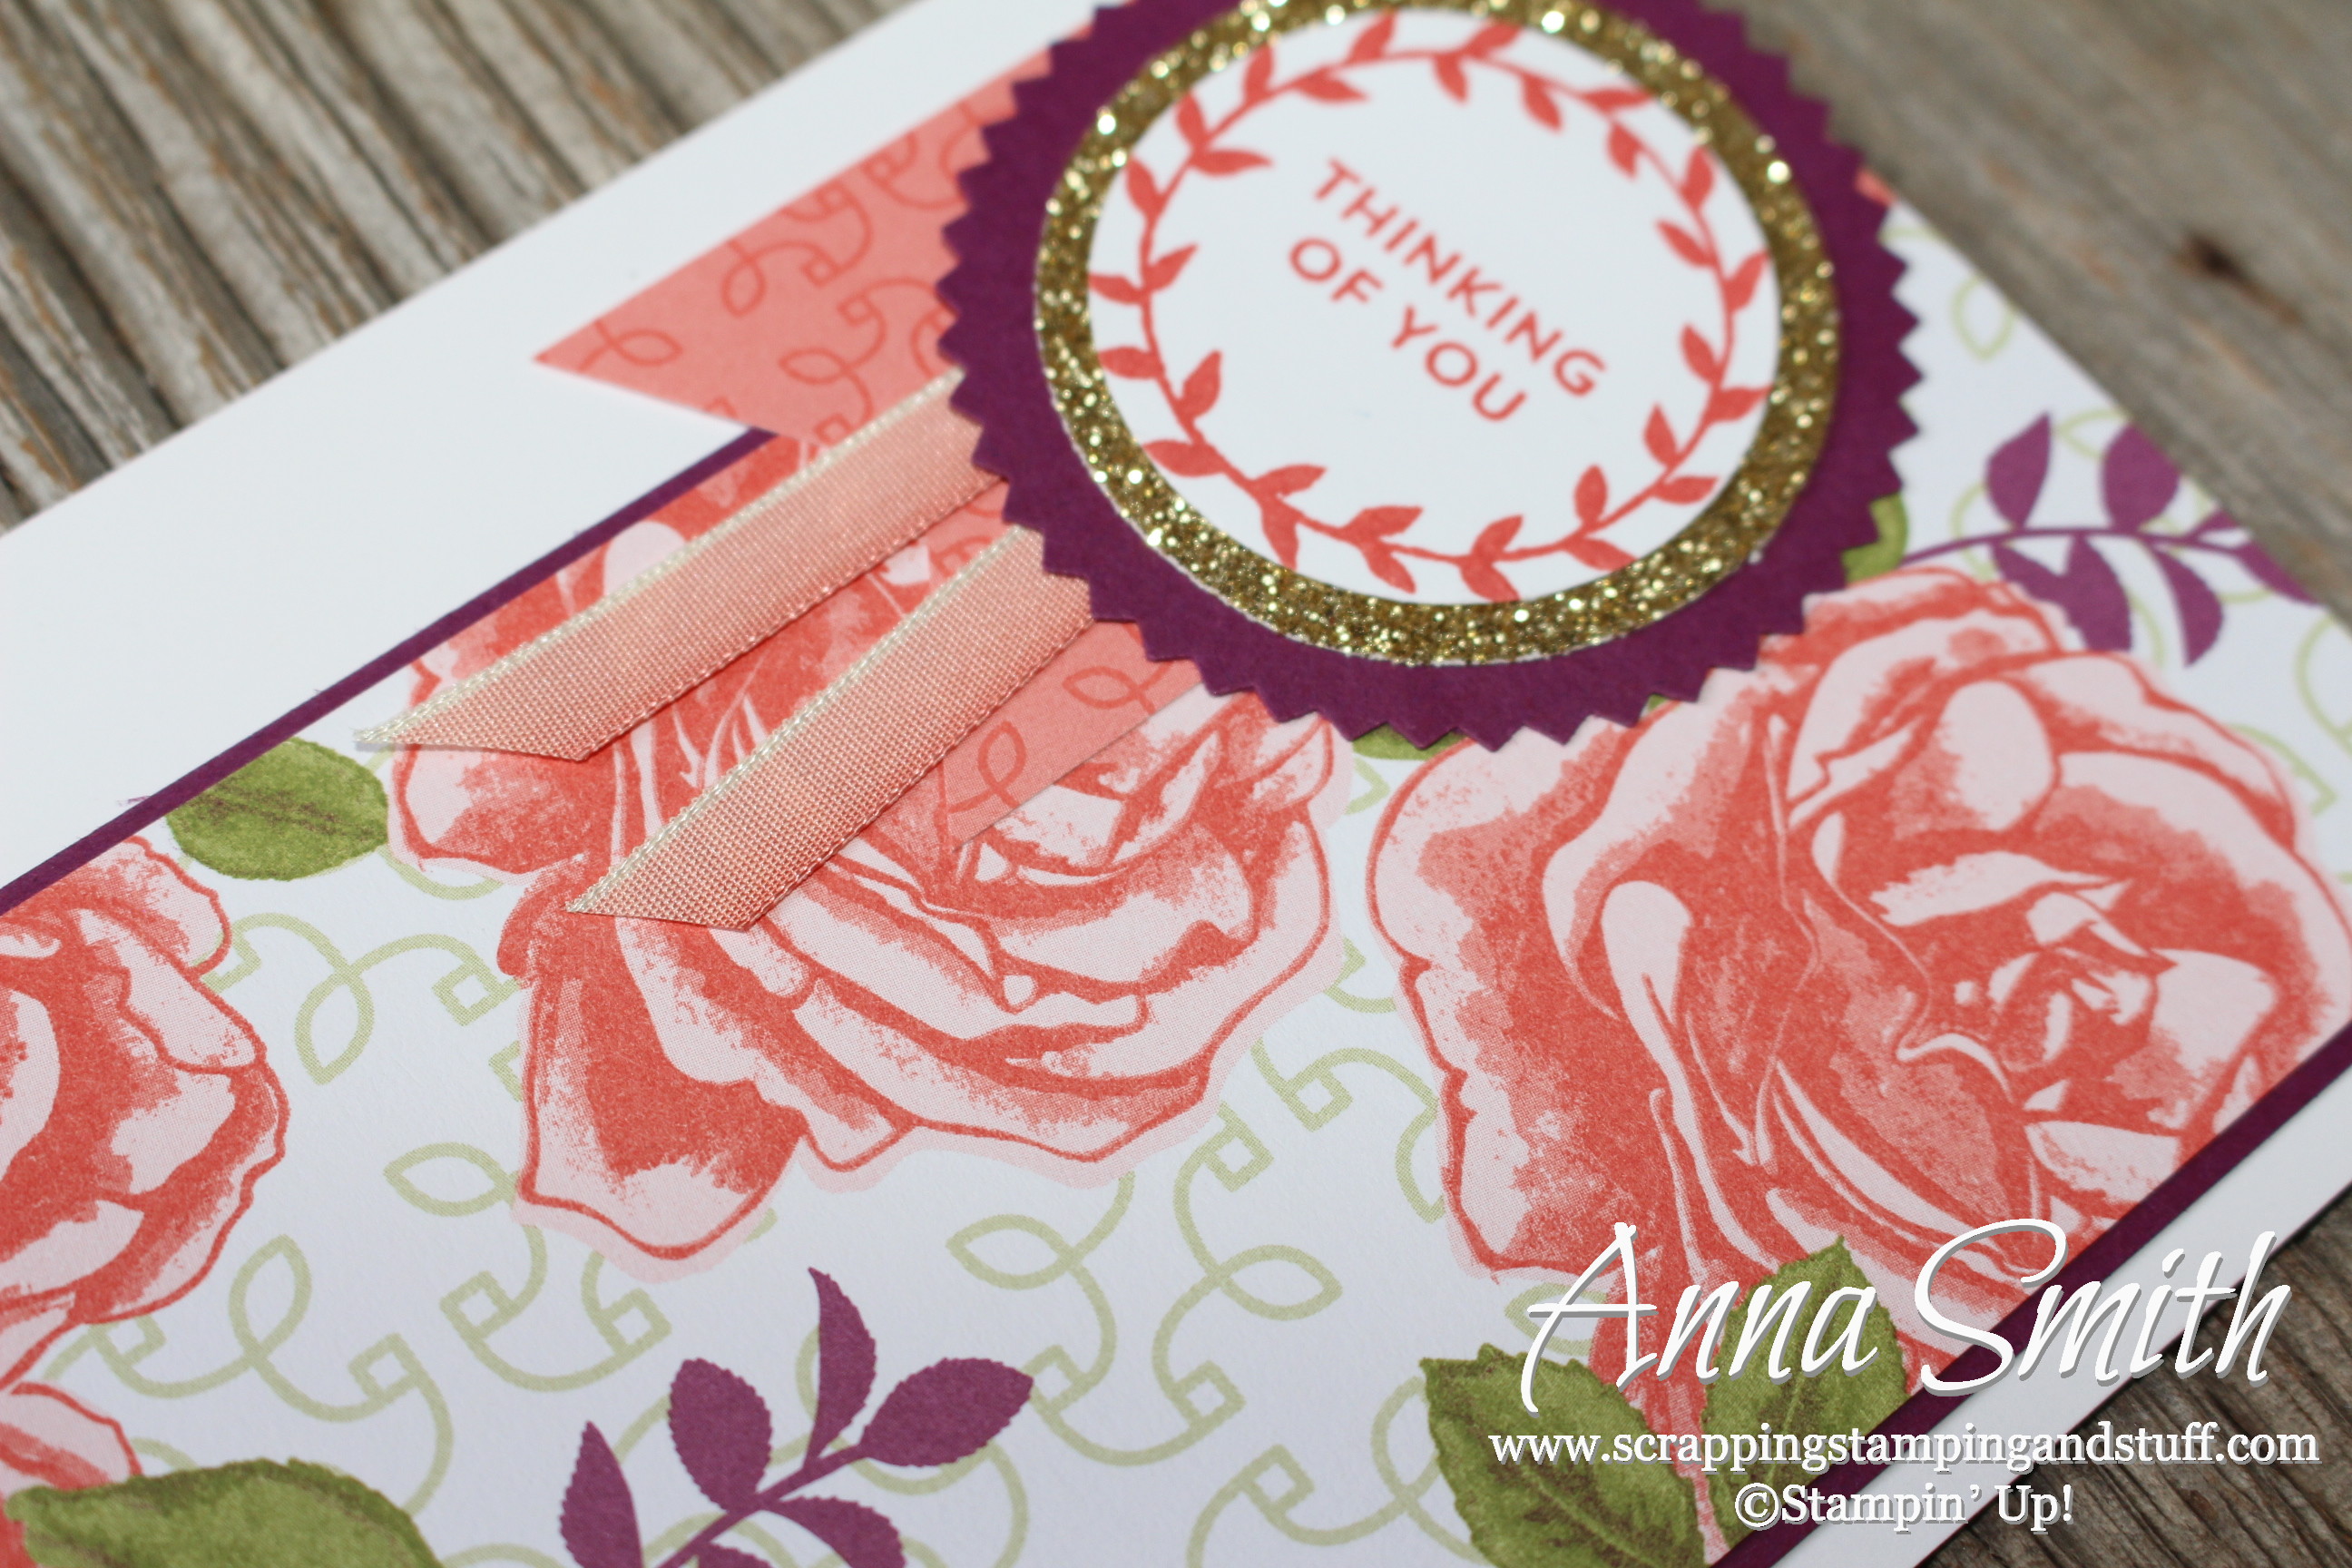 Stampin’ Up! Lots of Love Card